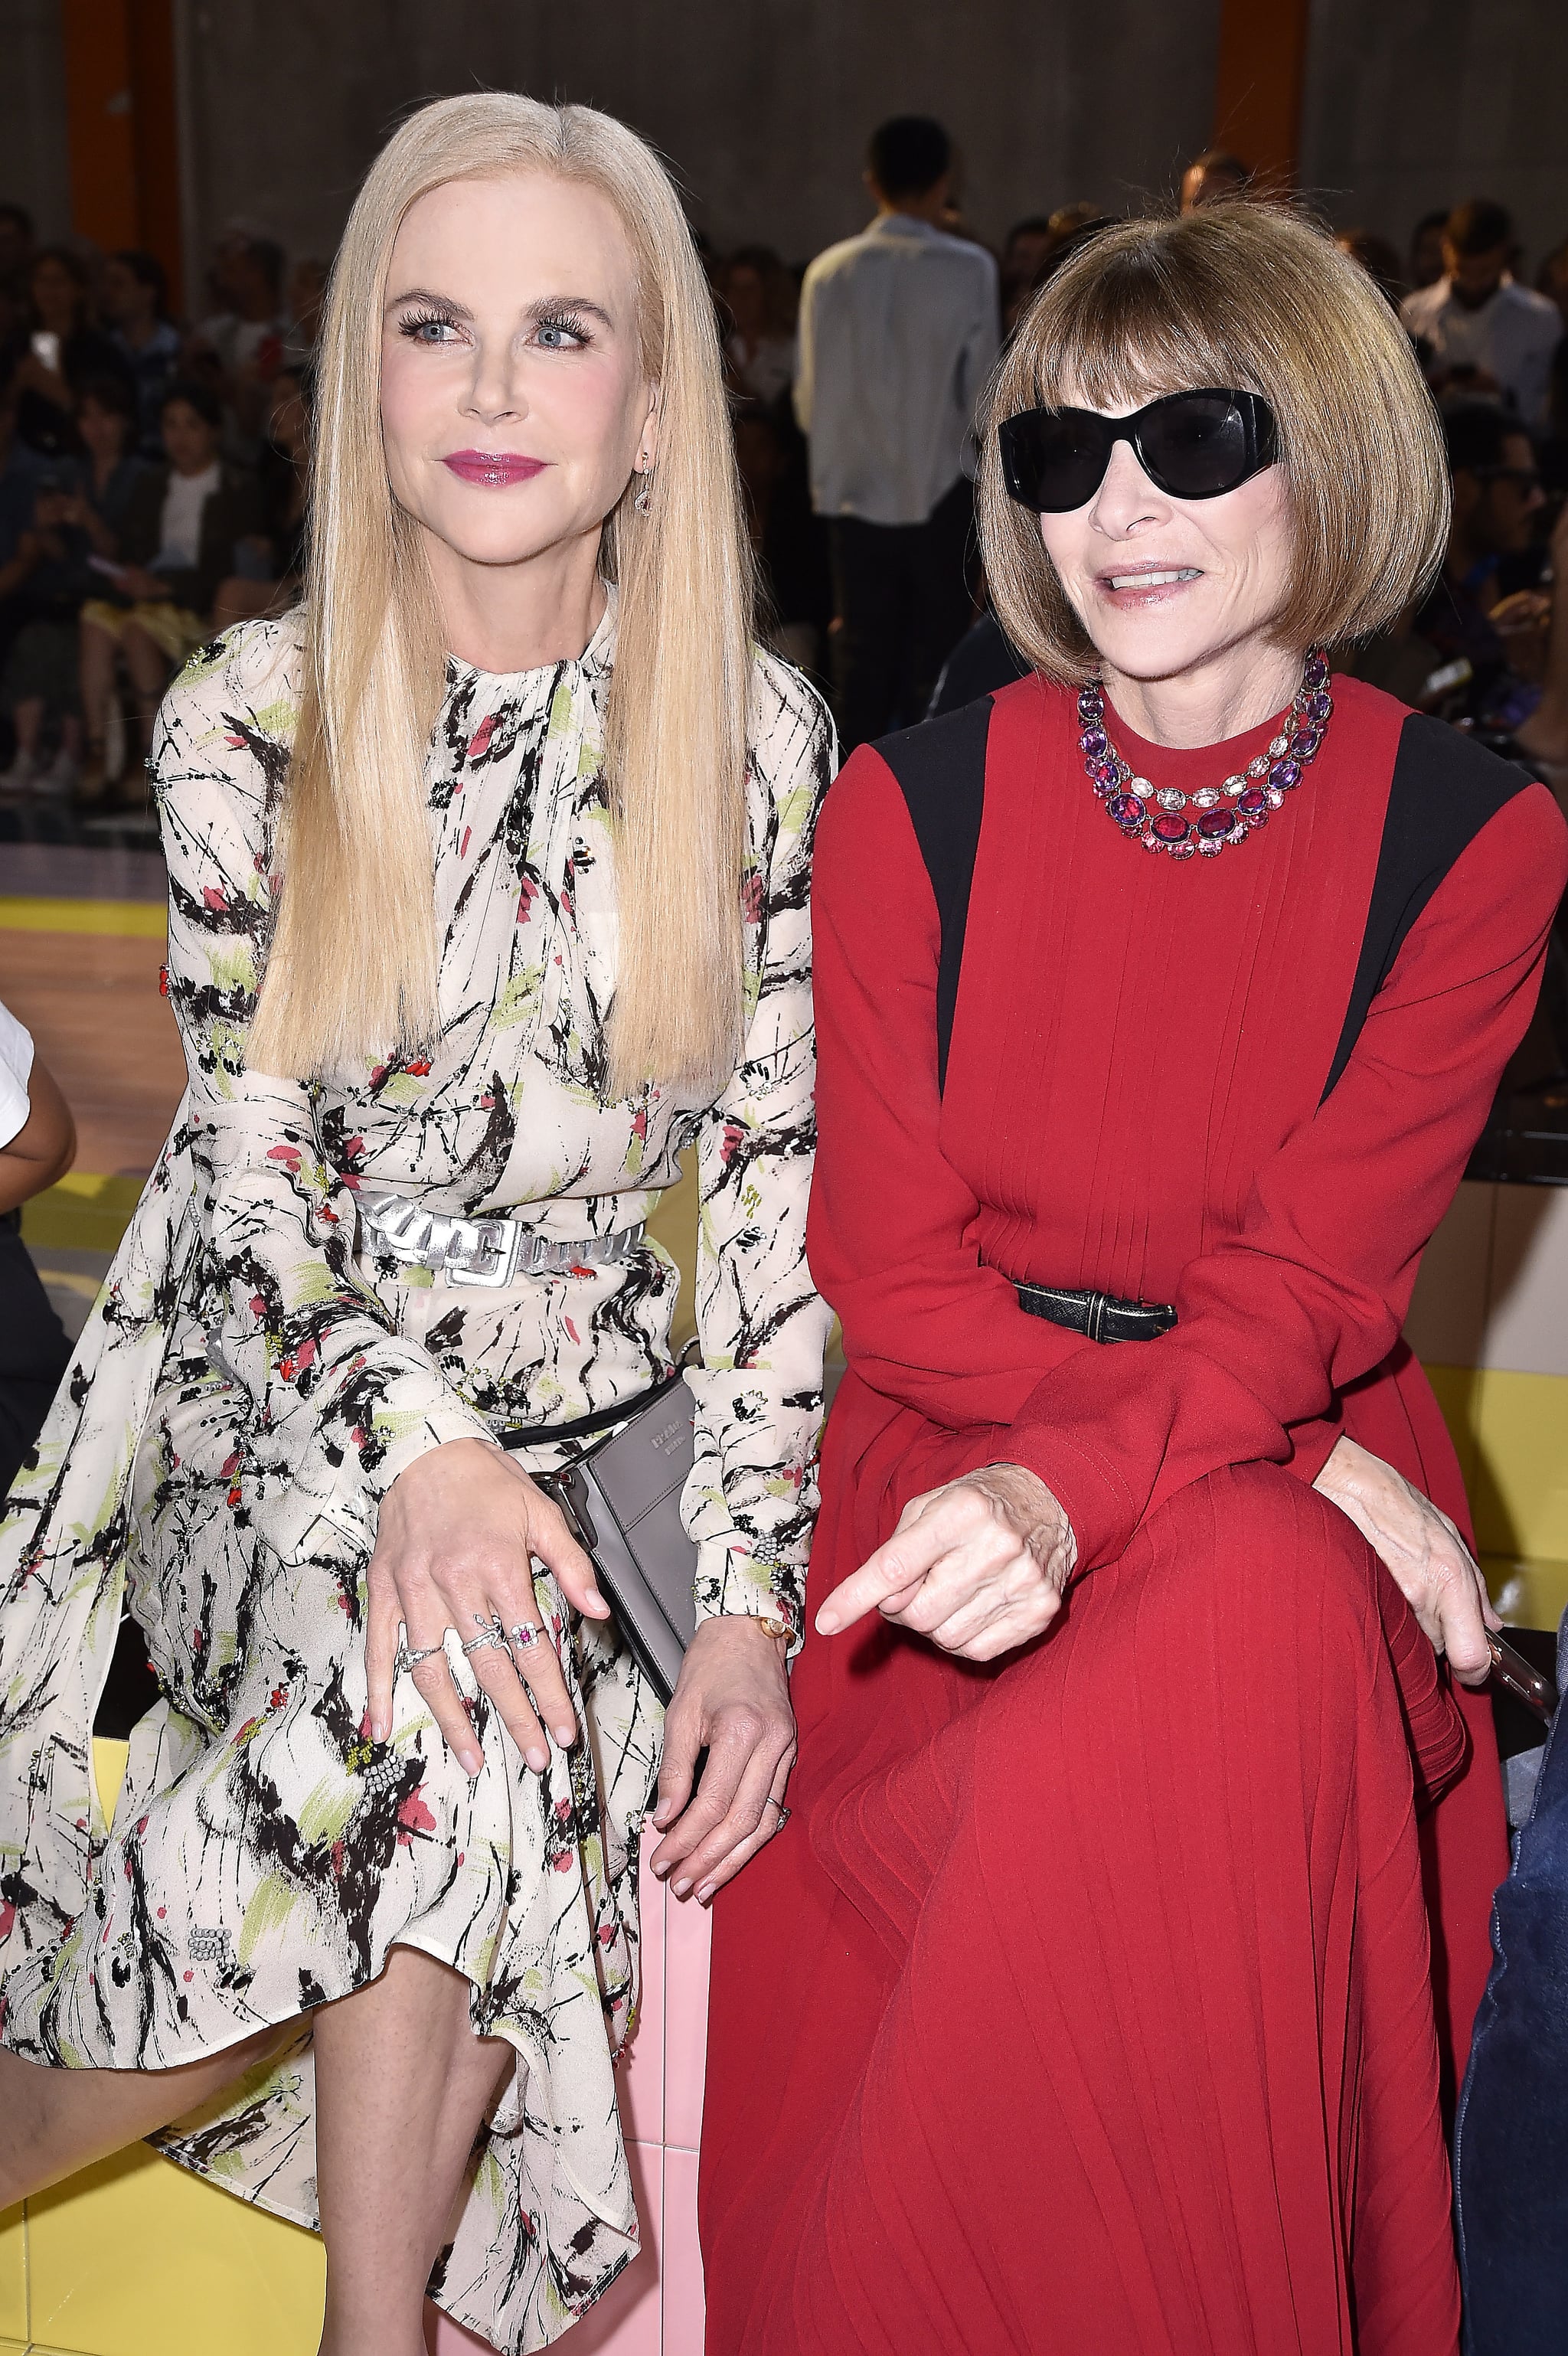 Nicole Kidman and Anna Wintour at the Prada Milan Fashion Week Show | See  What Every Celeb Wore to Fashion Week, From the Front Row to Parties |  POPSUGAR Fashion Photo 120